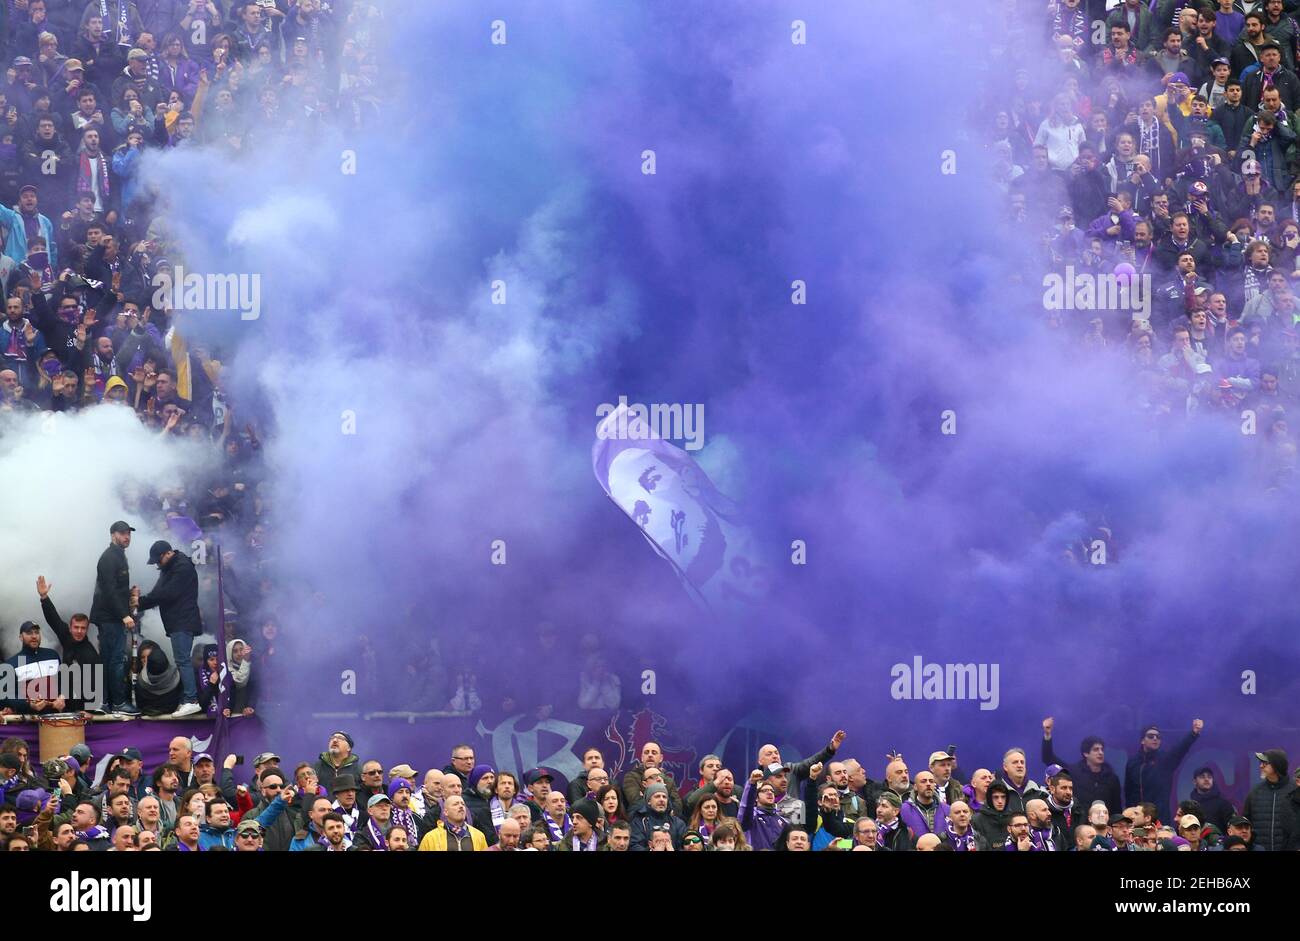 Soccer Football - Serie A - Fiorentina vs Benevento Calcio - Stadio Artemio Franchi, Florence, Italy - March 11, 2018   Fiorentina fans with a banner of former player Davide Astori before the match   REUTERS/Alessandro Bianchi Stock Photo